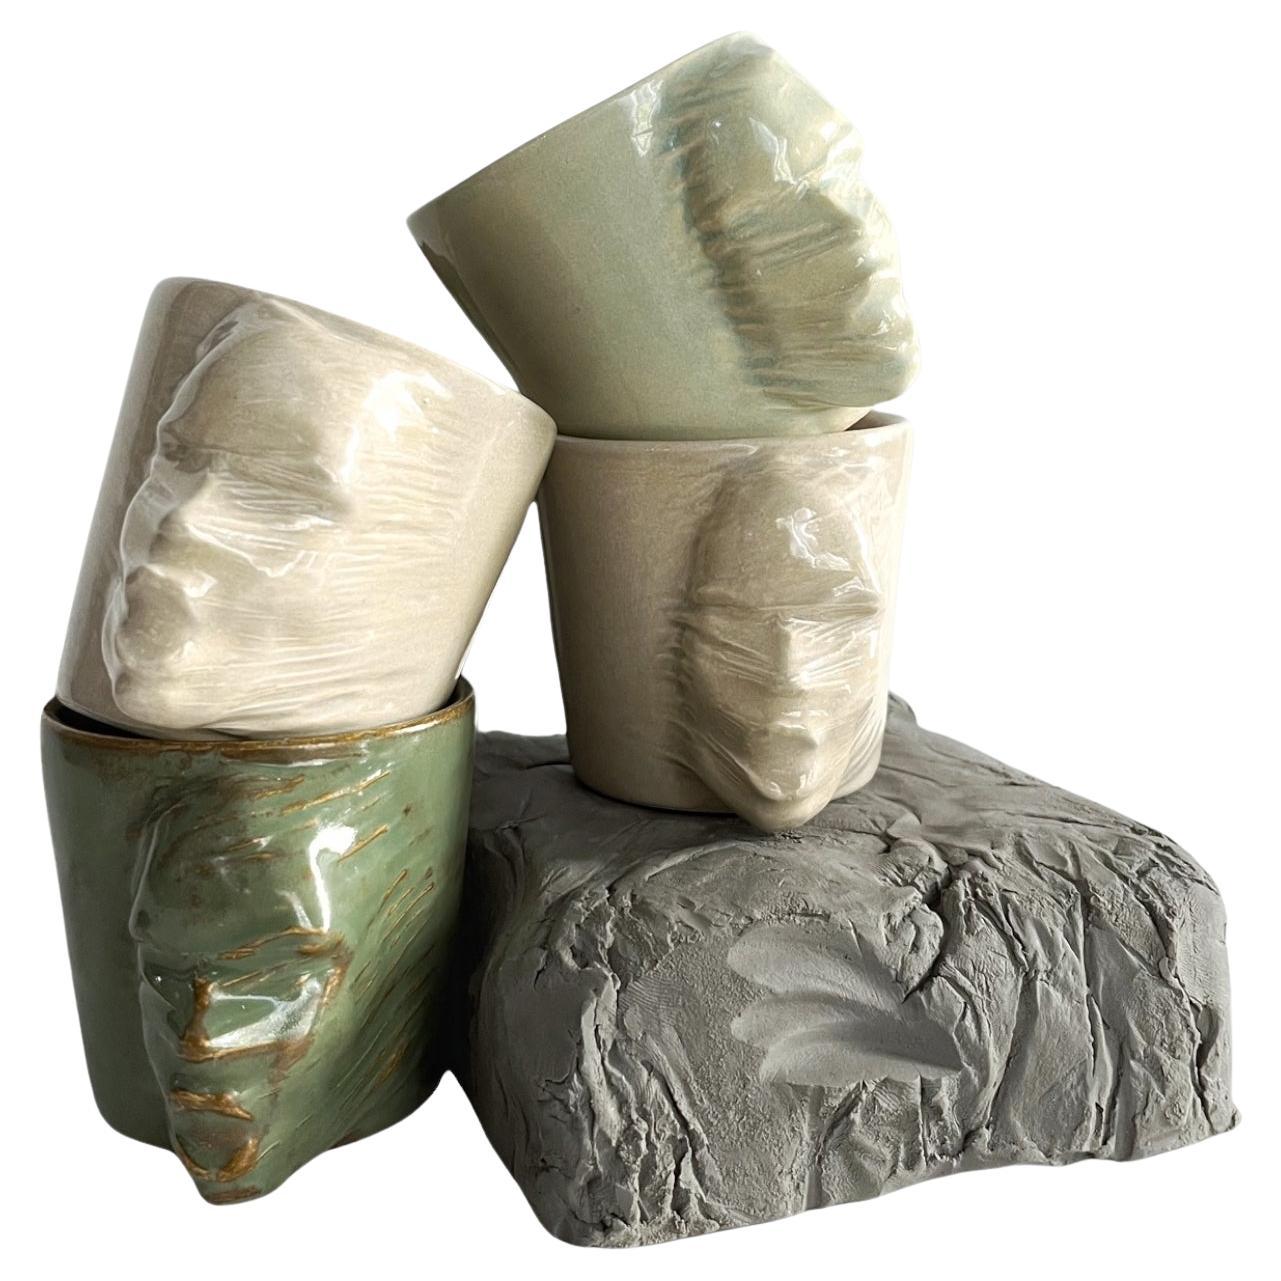 Sculptural Ceramic Cups Set of 4 by Hulya Sozer, Face Silhouette, Earth Tones